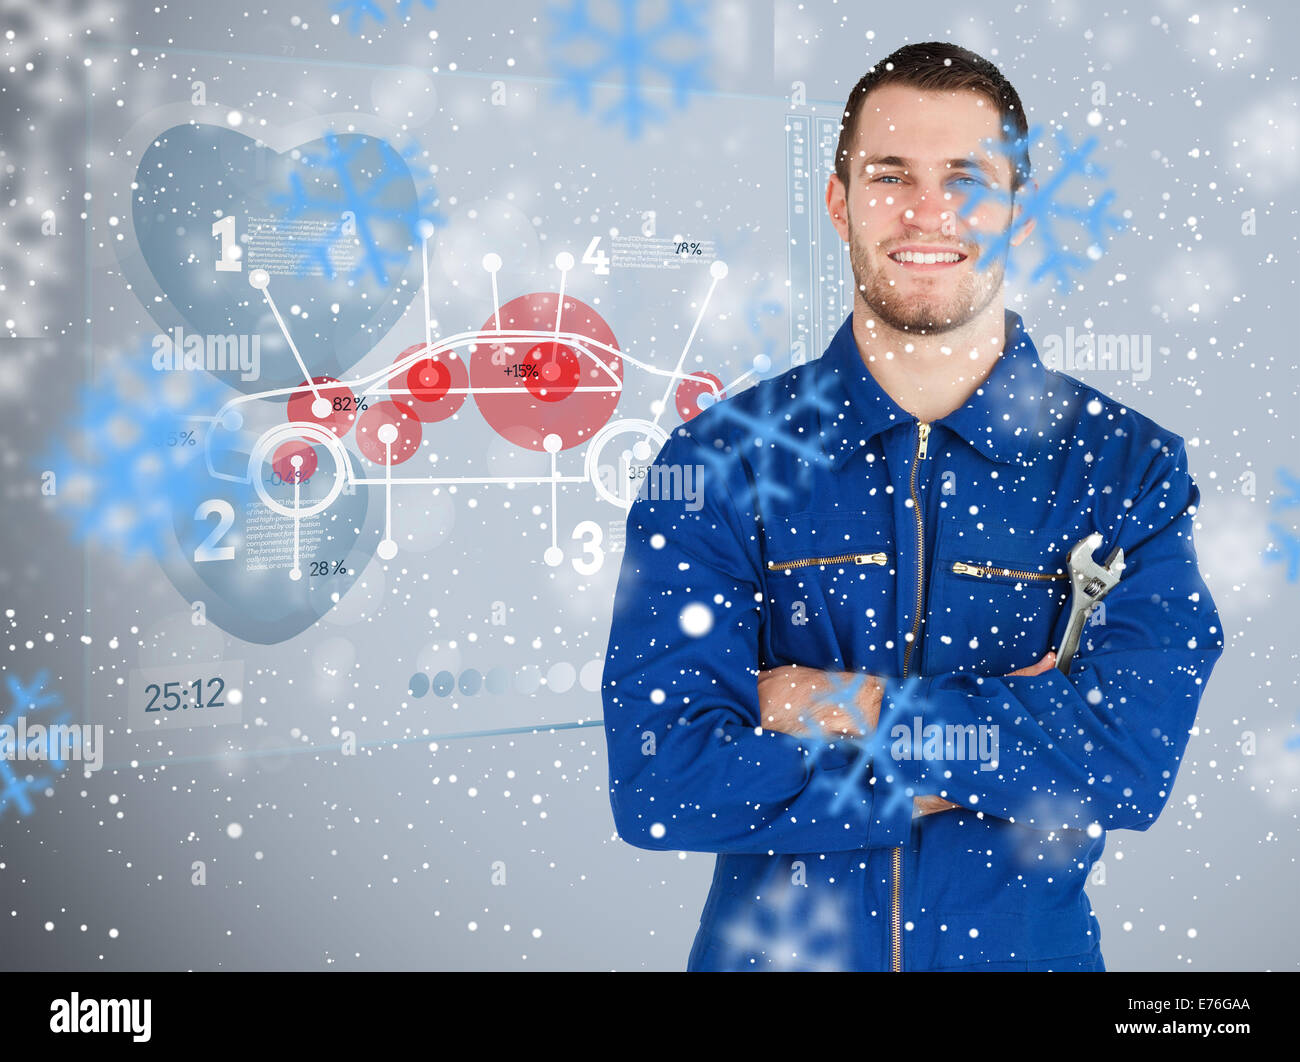 Composite image of portrait of a young mechanic next to futuristic interface Stock Photo